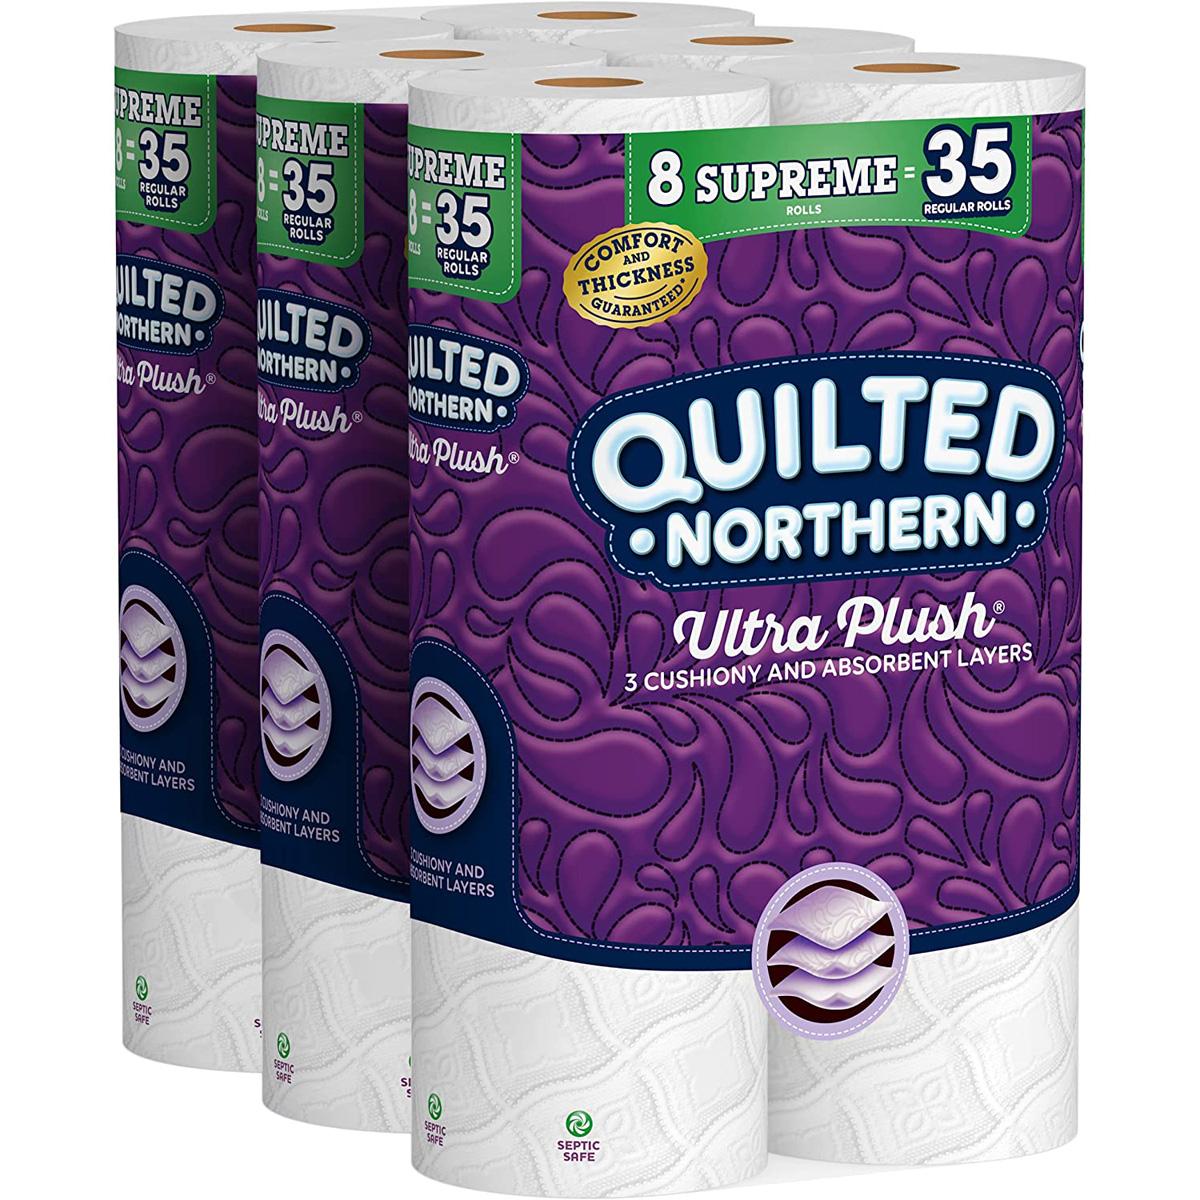 24 Quilted Northern Ultra Plush Supreme Rolls Toilet Paper for $21.32 Shipped